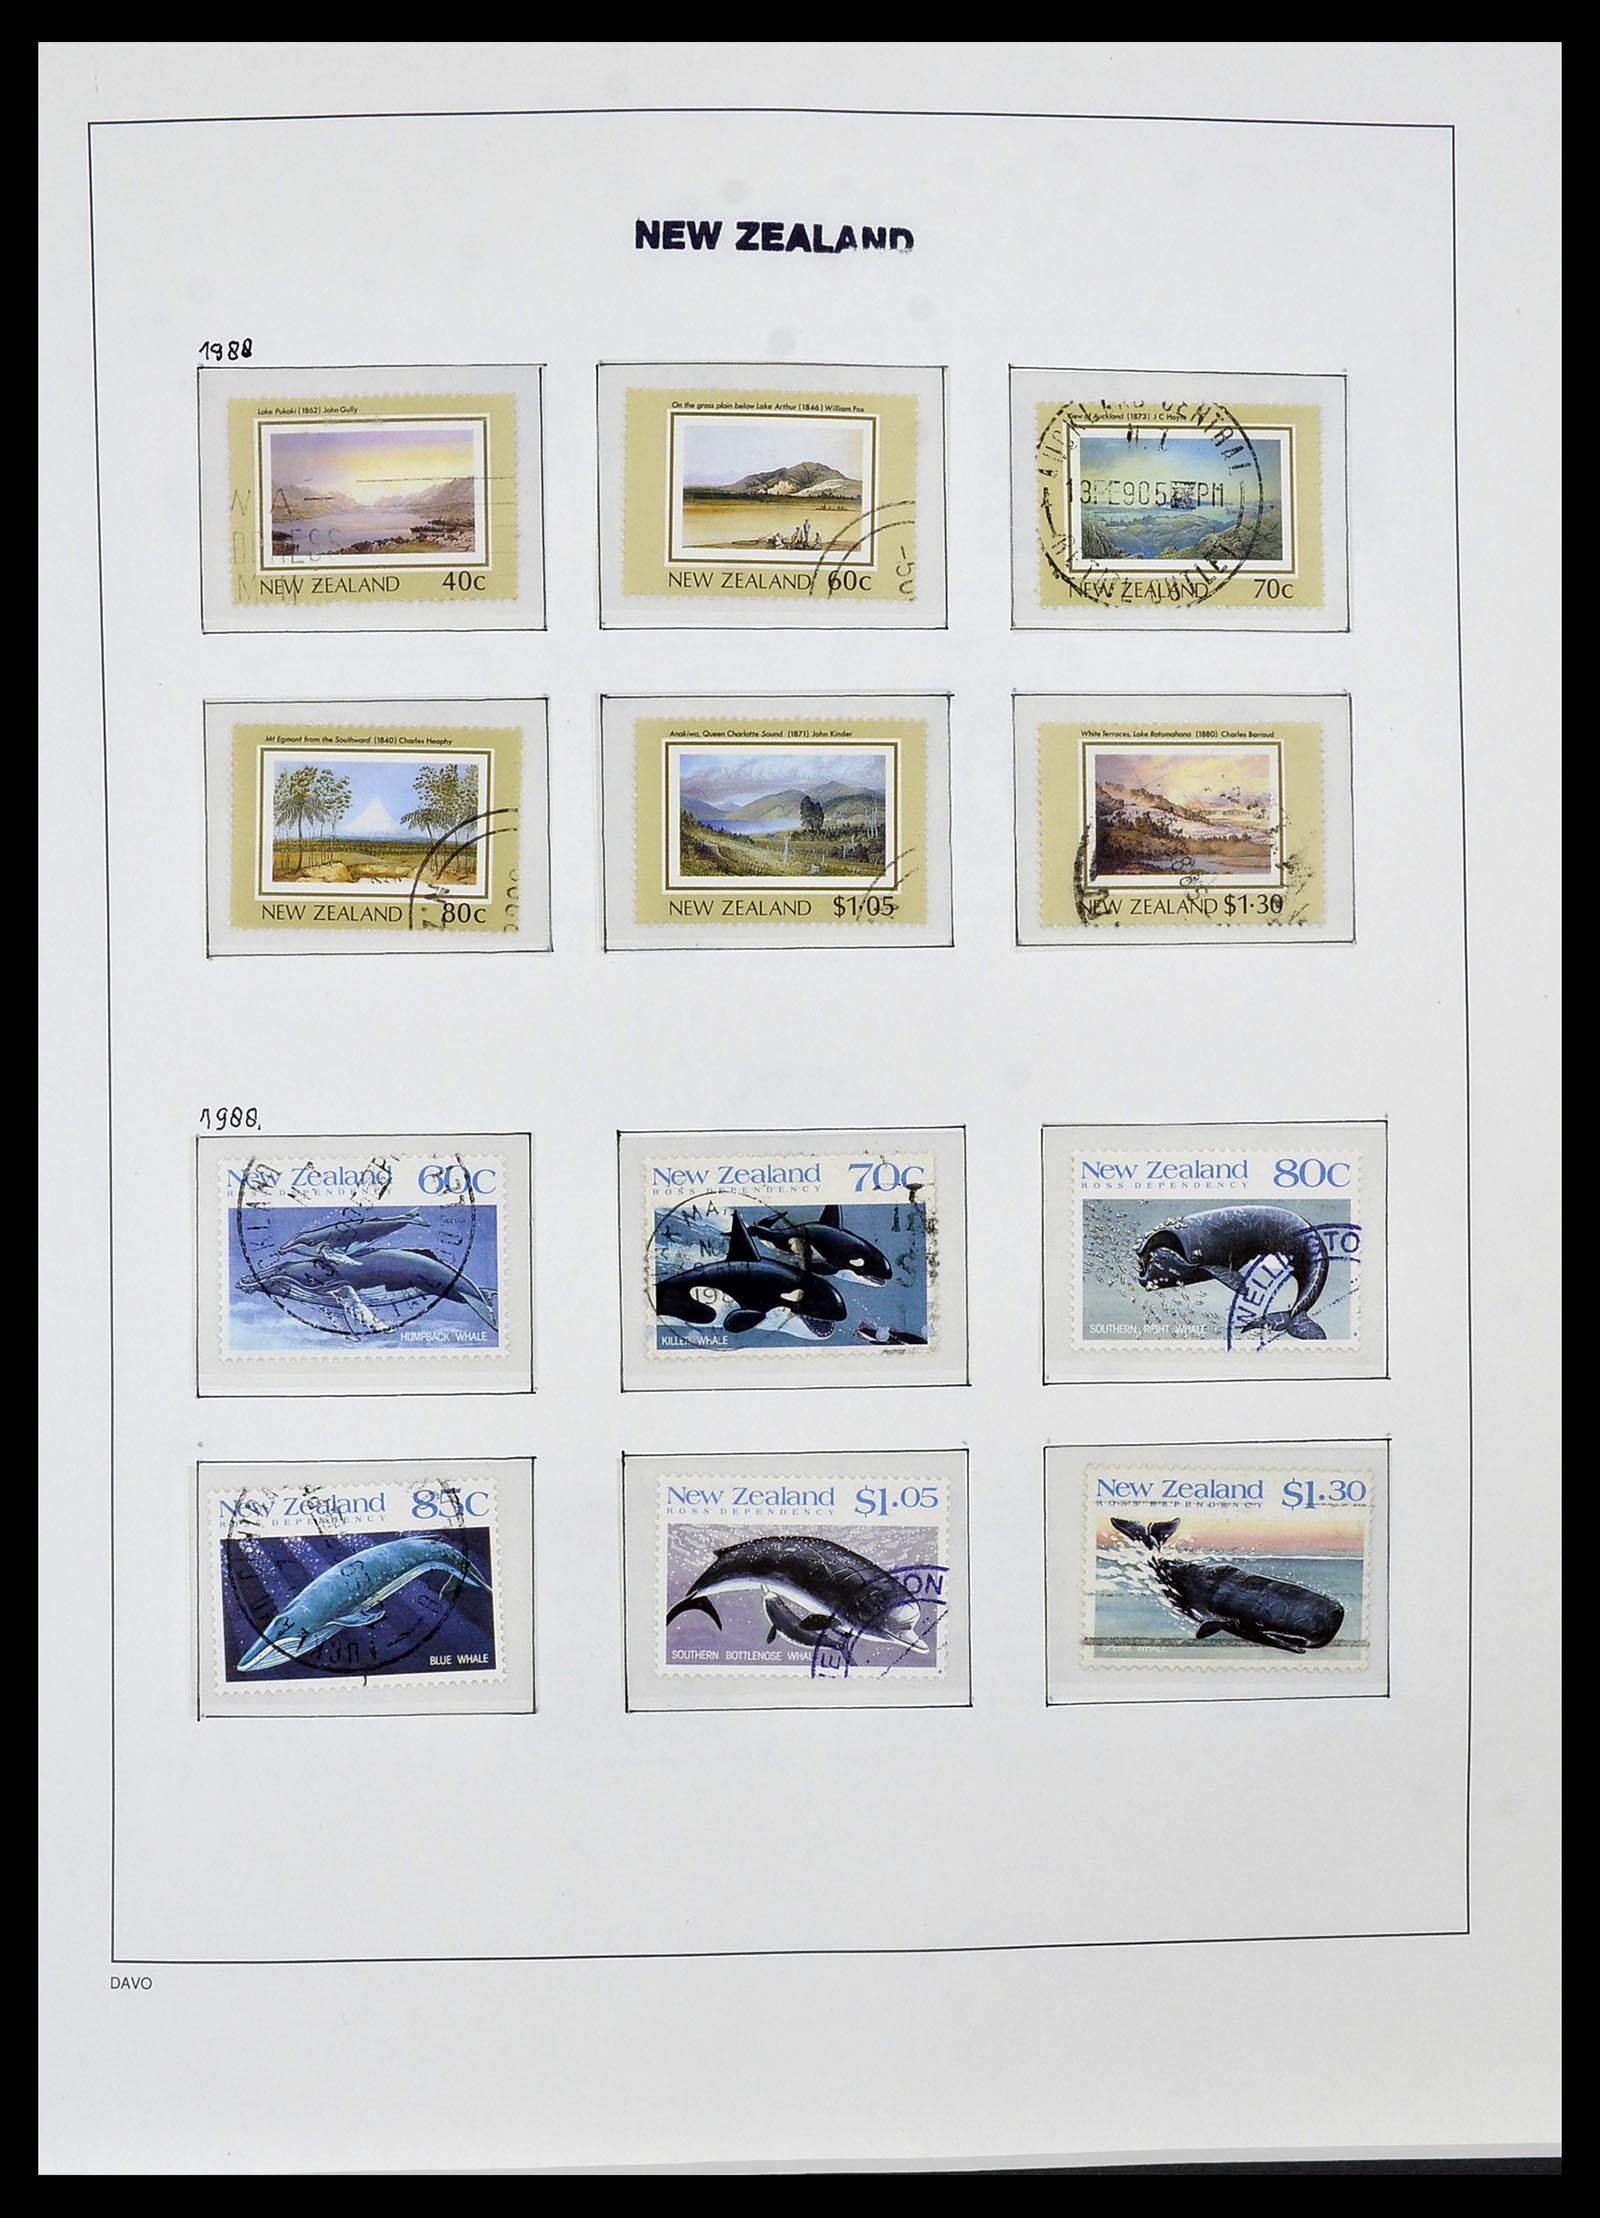 34288 081 - Stamp collection 34288 New Zealand 1900-2002.